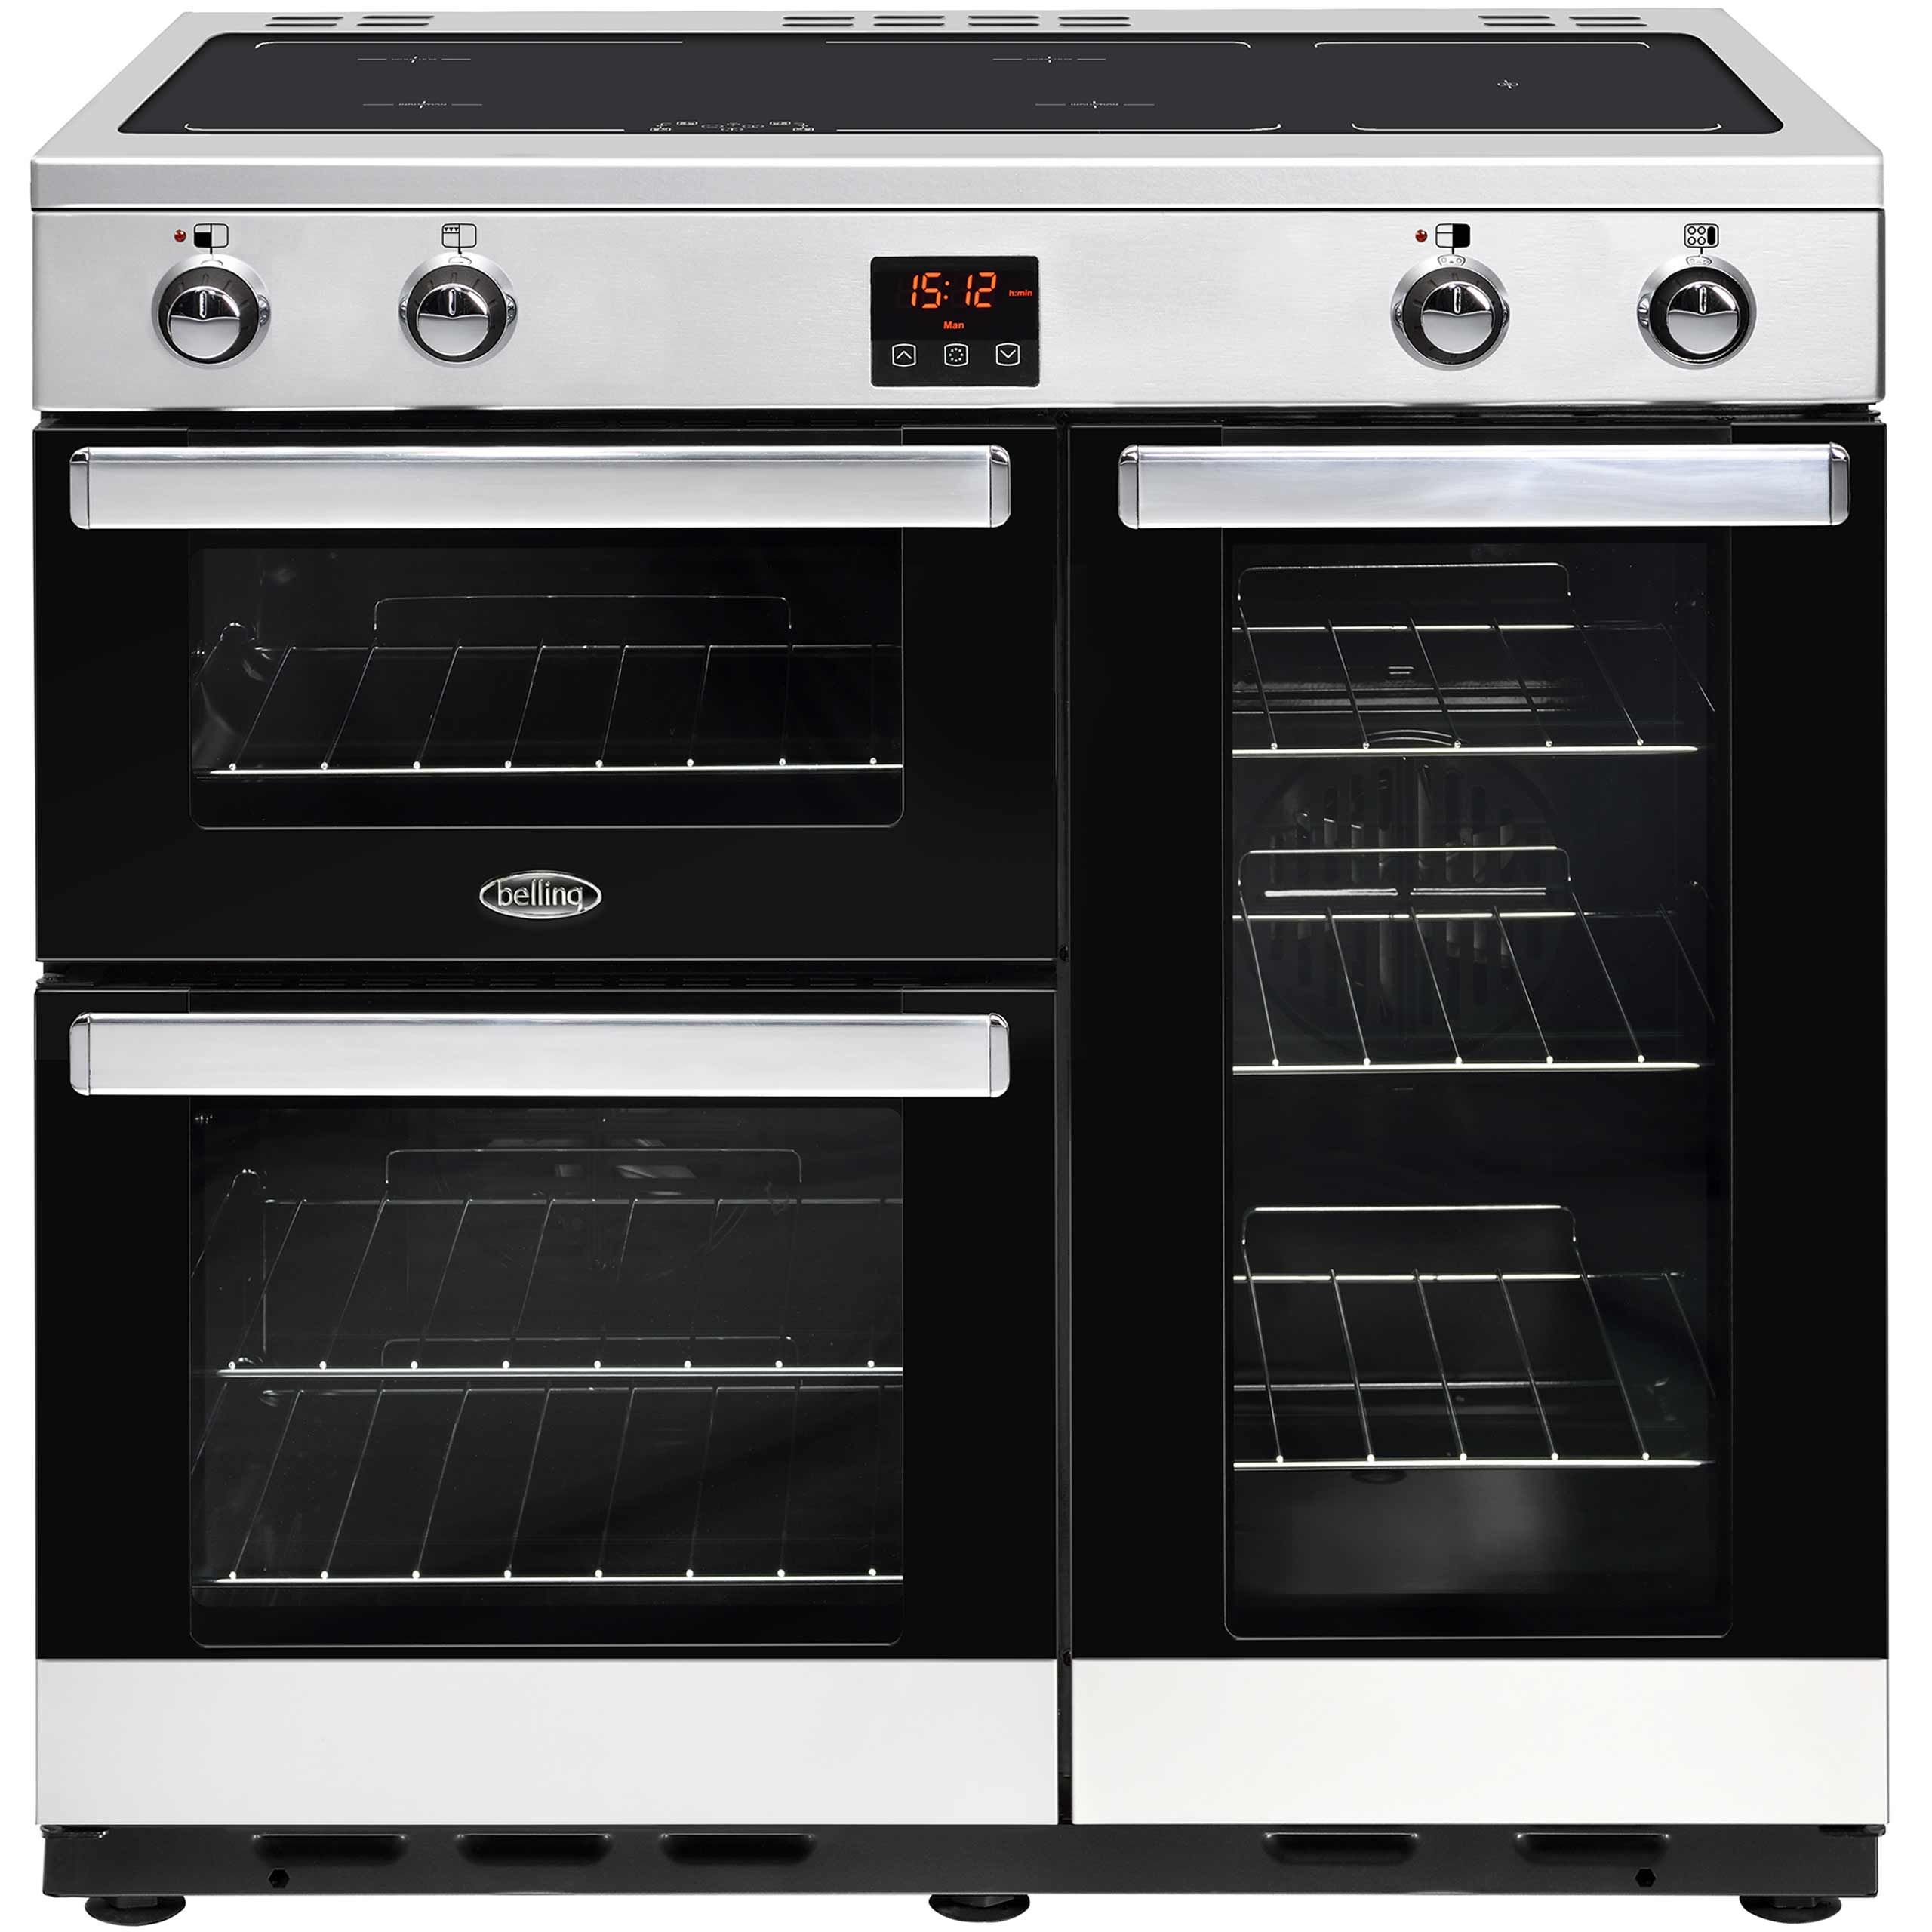 Belling Cookcentre90Ei 90cm Electric Range Cooker with Induction Hob - Stainless Steel - A/A Rated, Stainless Steel